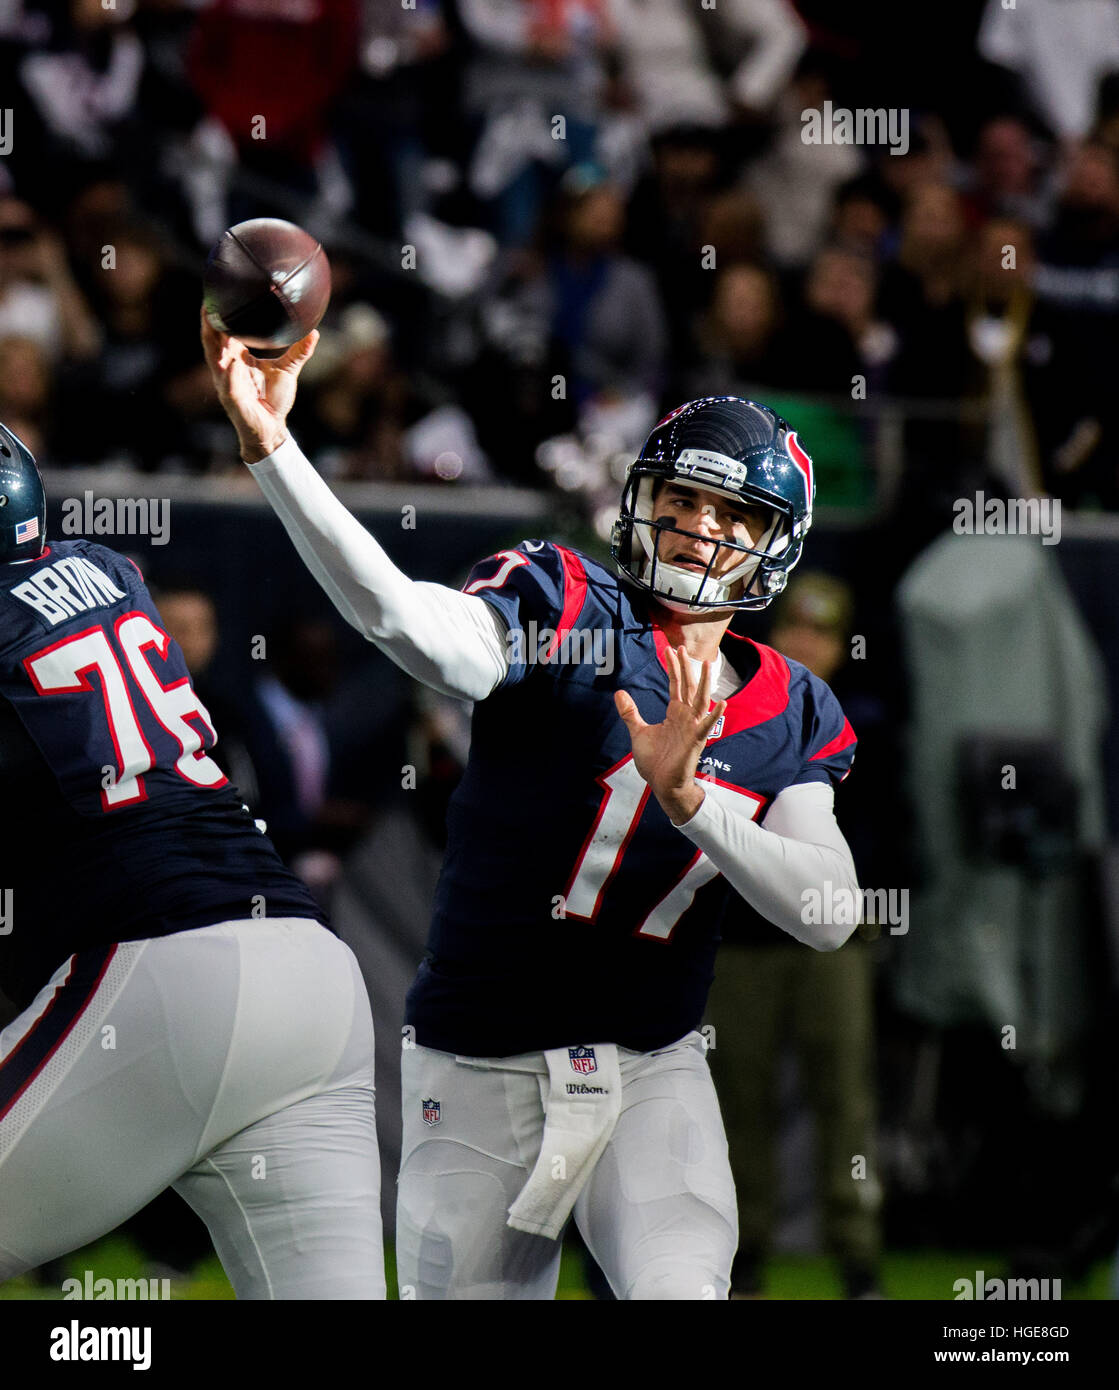 07.01.2017. Houston, TX, USA.  Houston Texans quarterback Brock Osweiler (17) throwing the ball during the first half of the AFC Wild Card football game between the Houston Texans and the Oakland Raiders on January 07, 2017, at NRG Stadium in Houston. Stock Photo